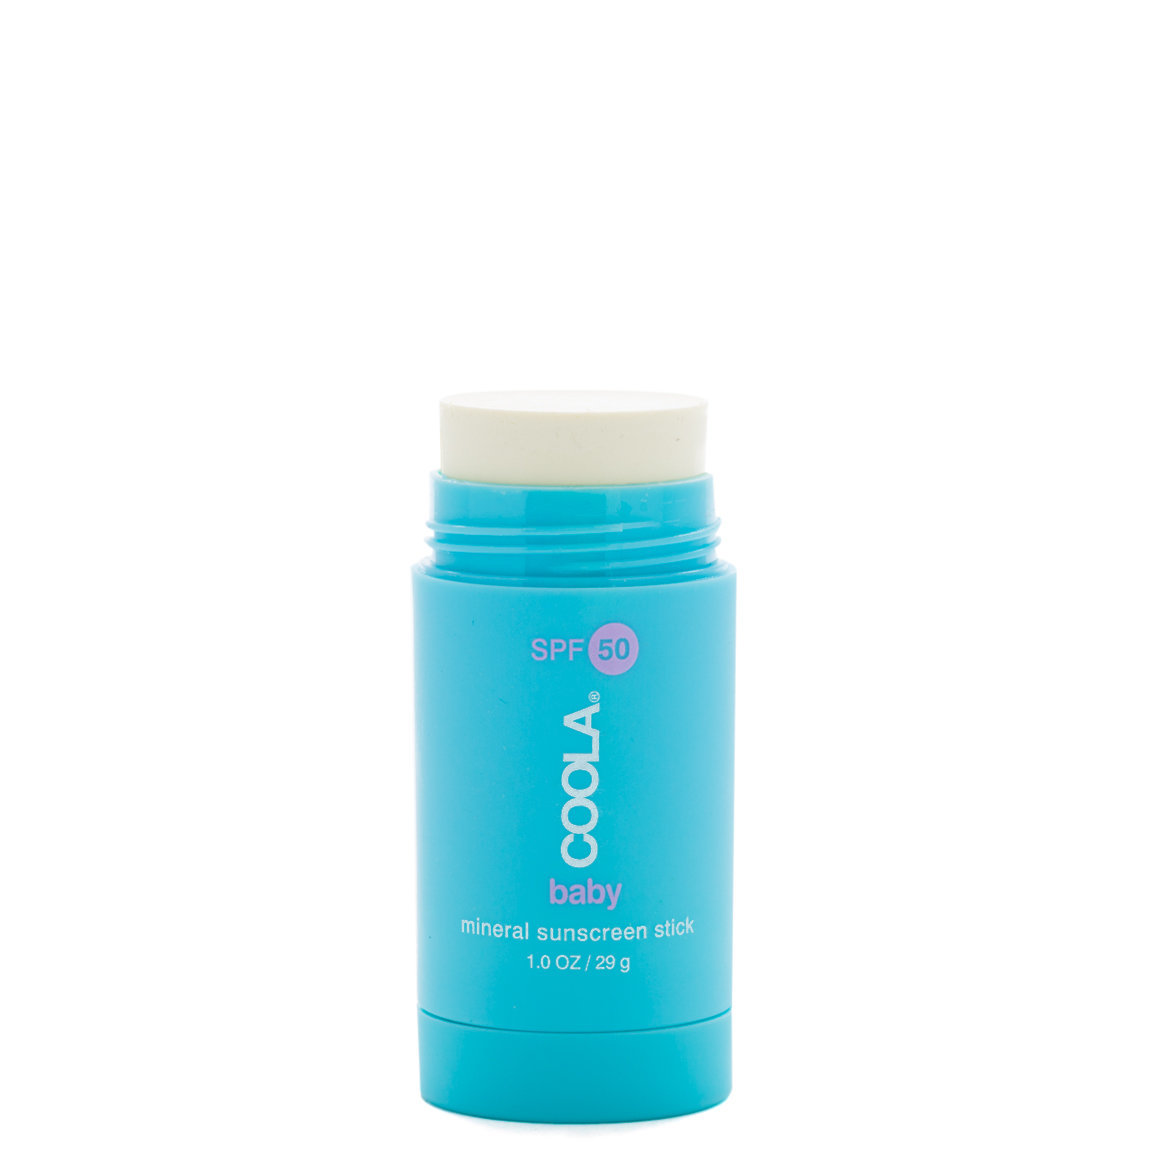 coola sunscreen for babies